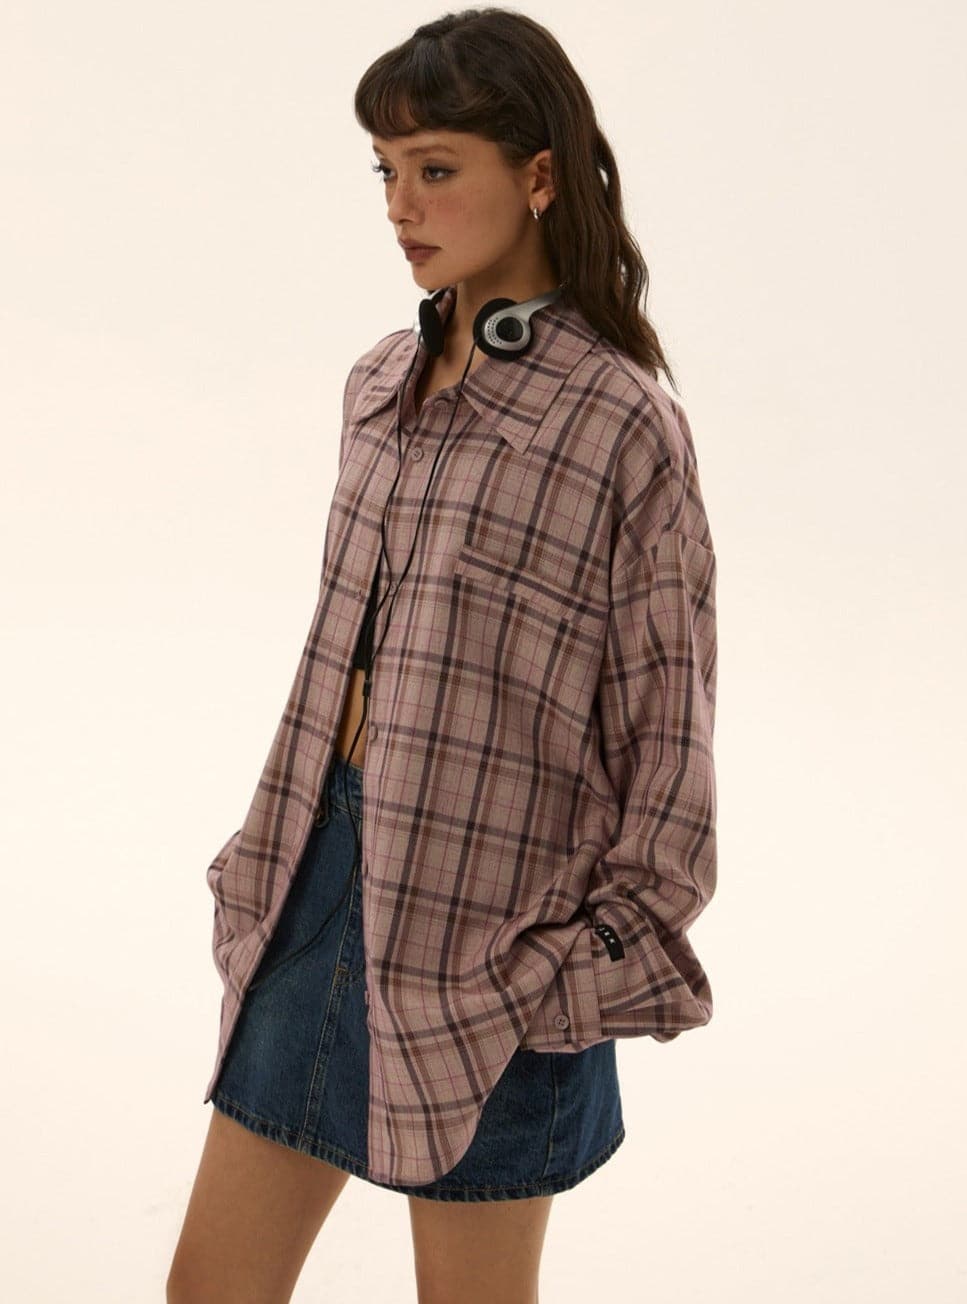 Sleek Outerwear: The Ultimate Shirt Jacket For Tops - chiclara